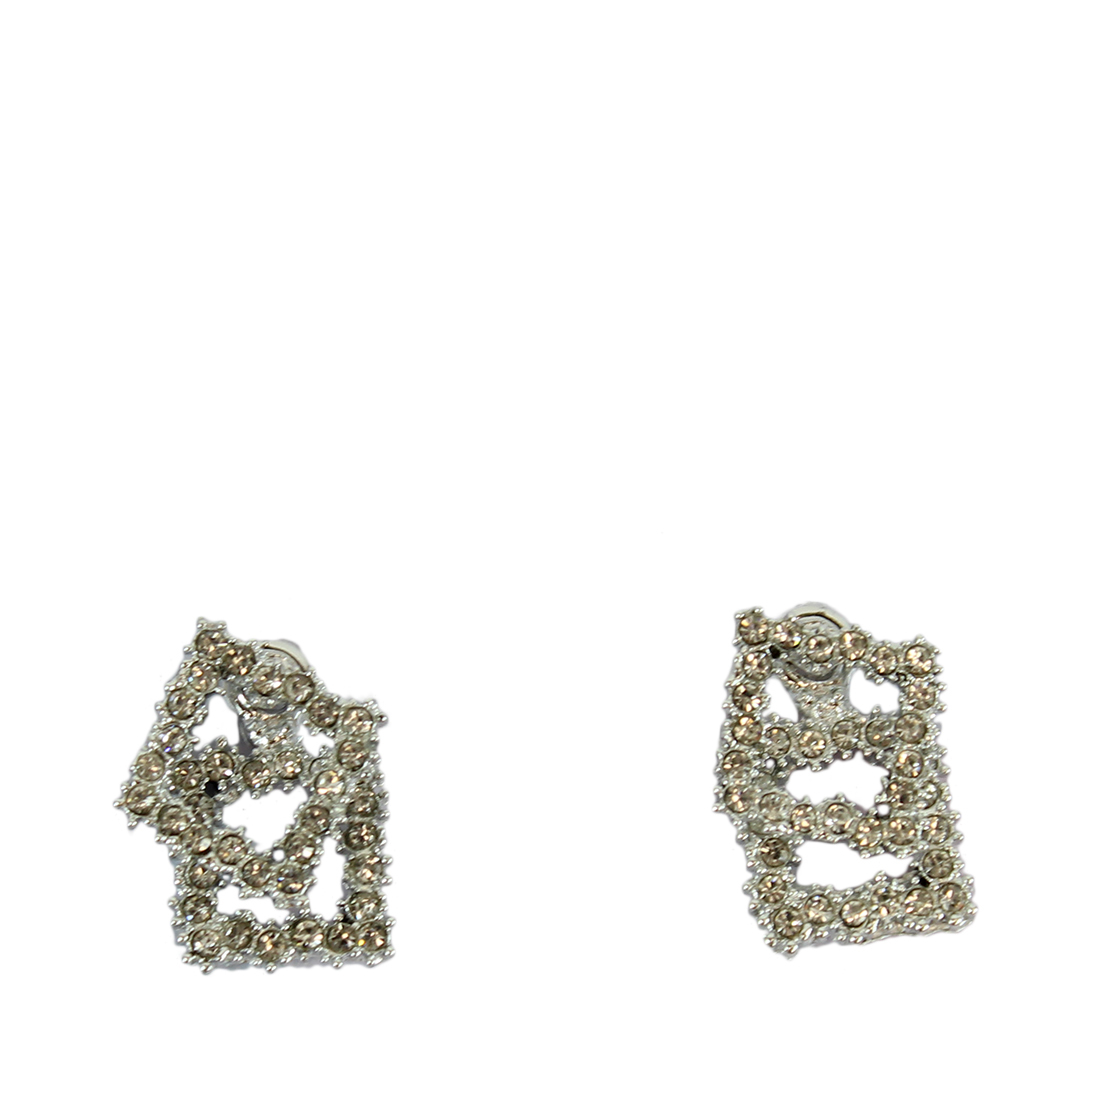 Square design hanging earrings with tiny diamonds